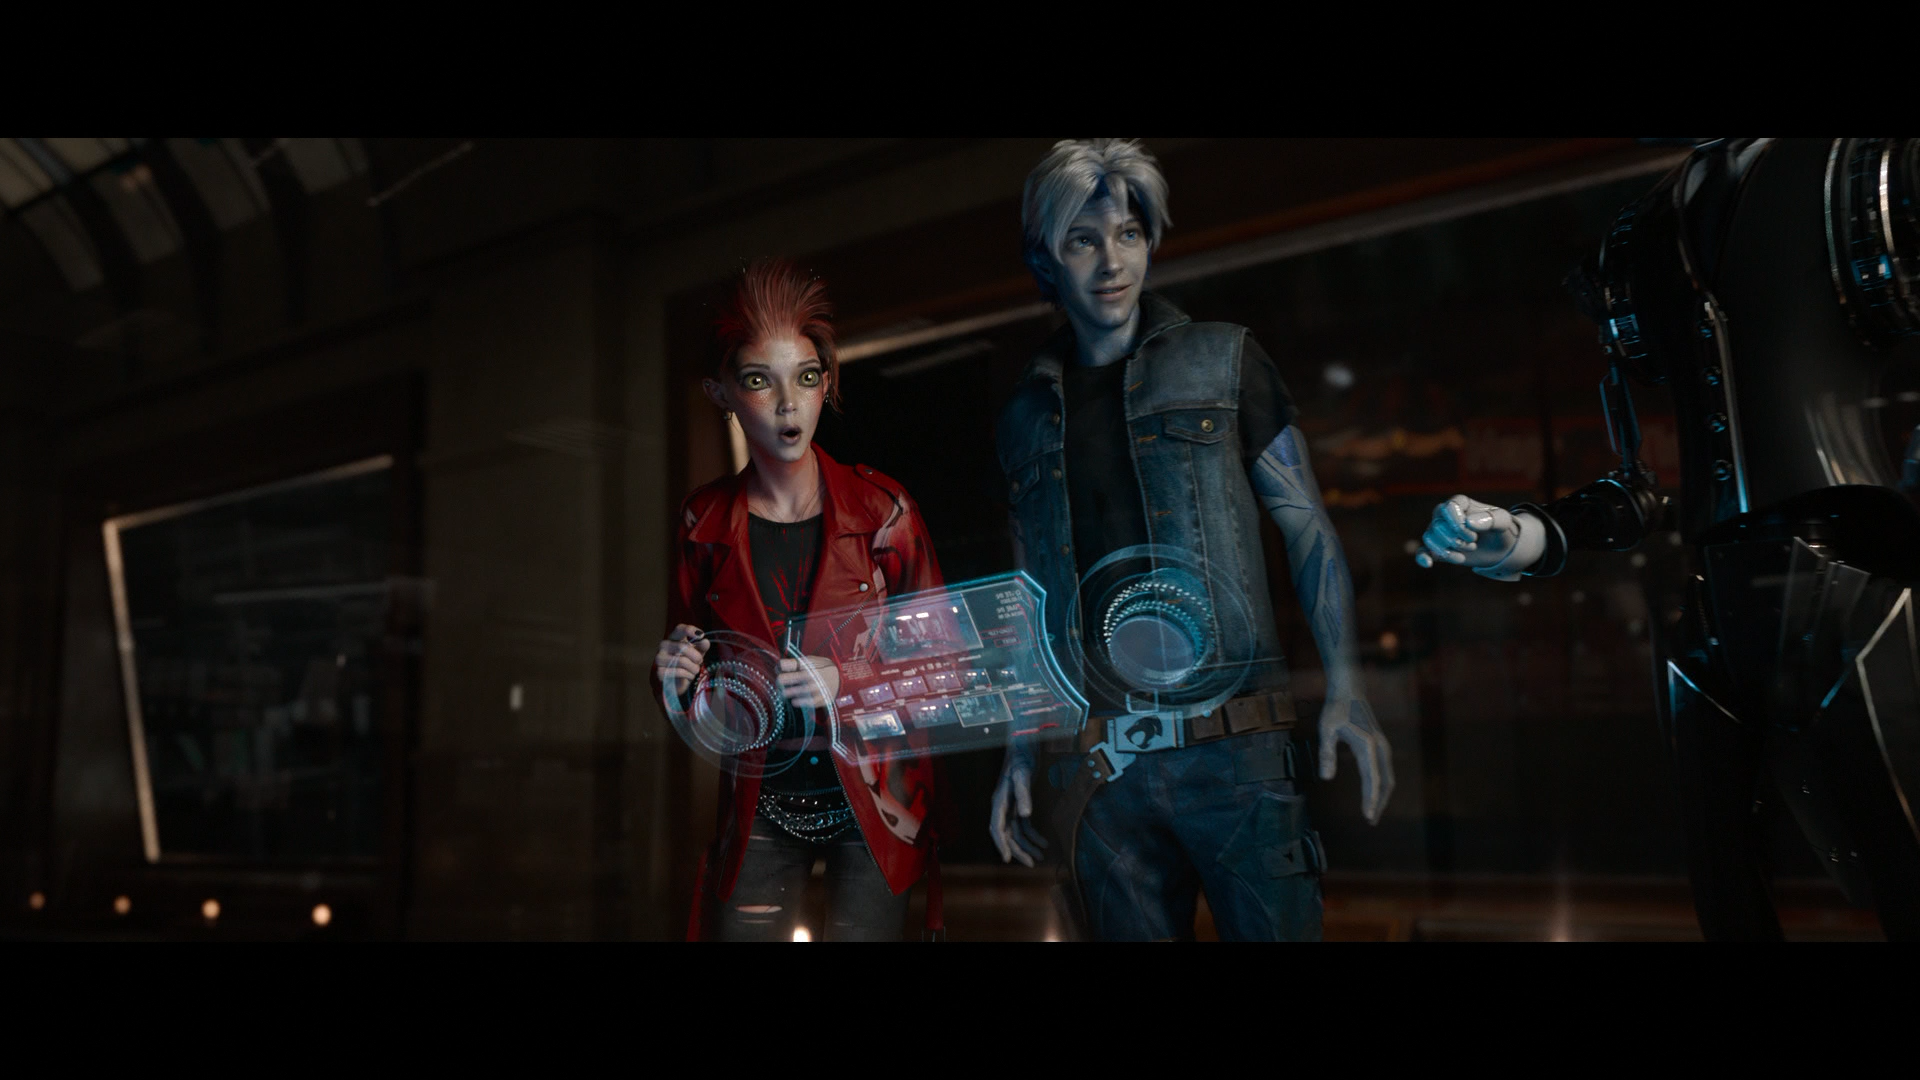 Ready Player One 4K Ultra HD Review + BD Screen Caps's Guide to the Movies